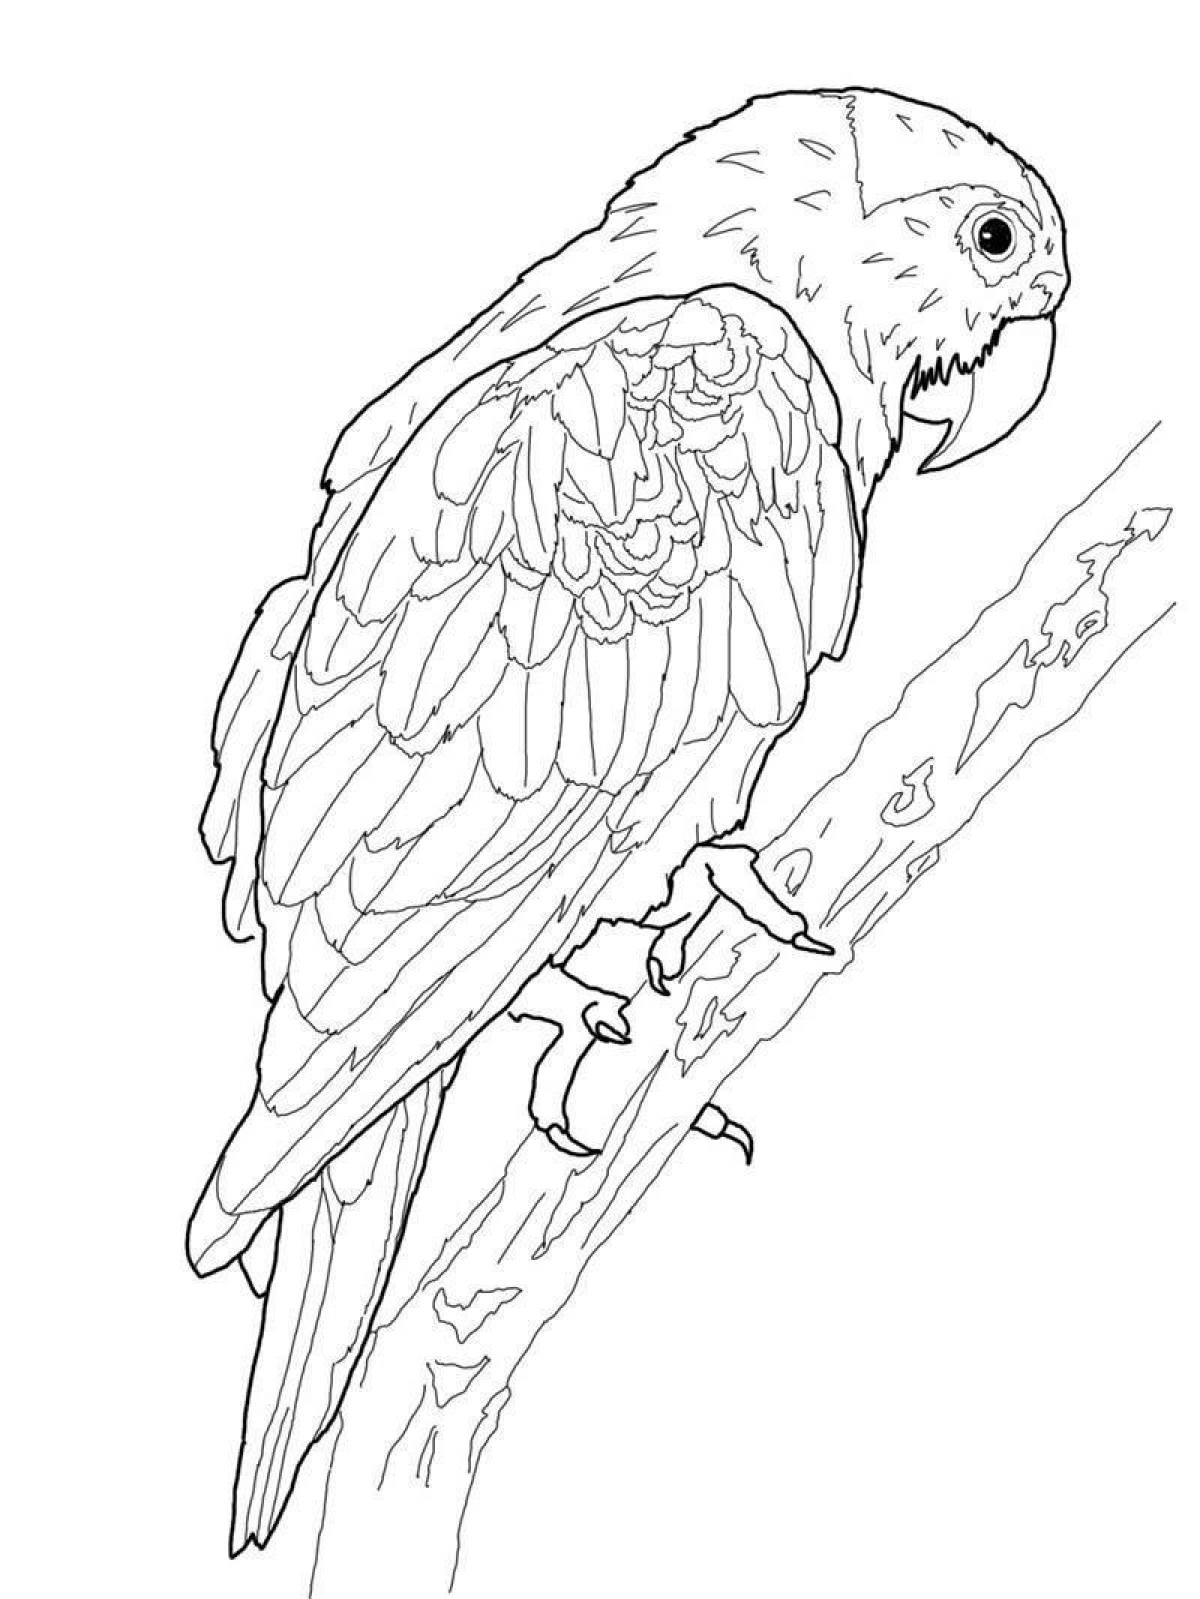 Colouring bright parrot